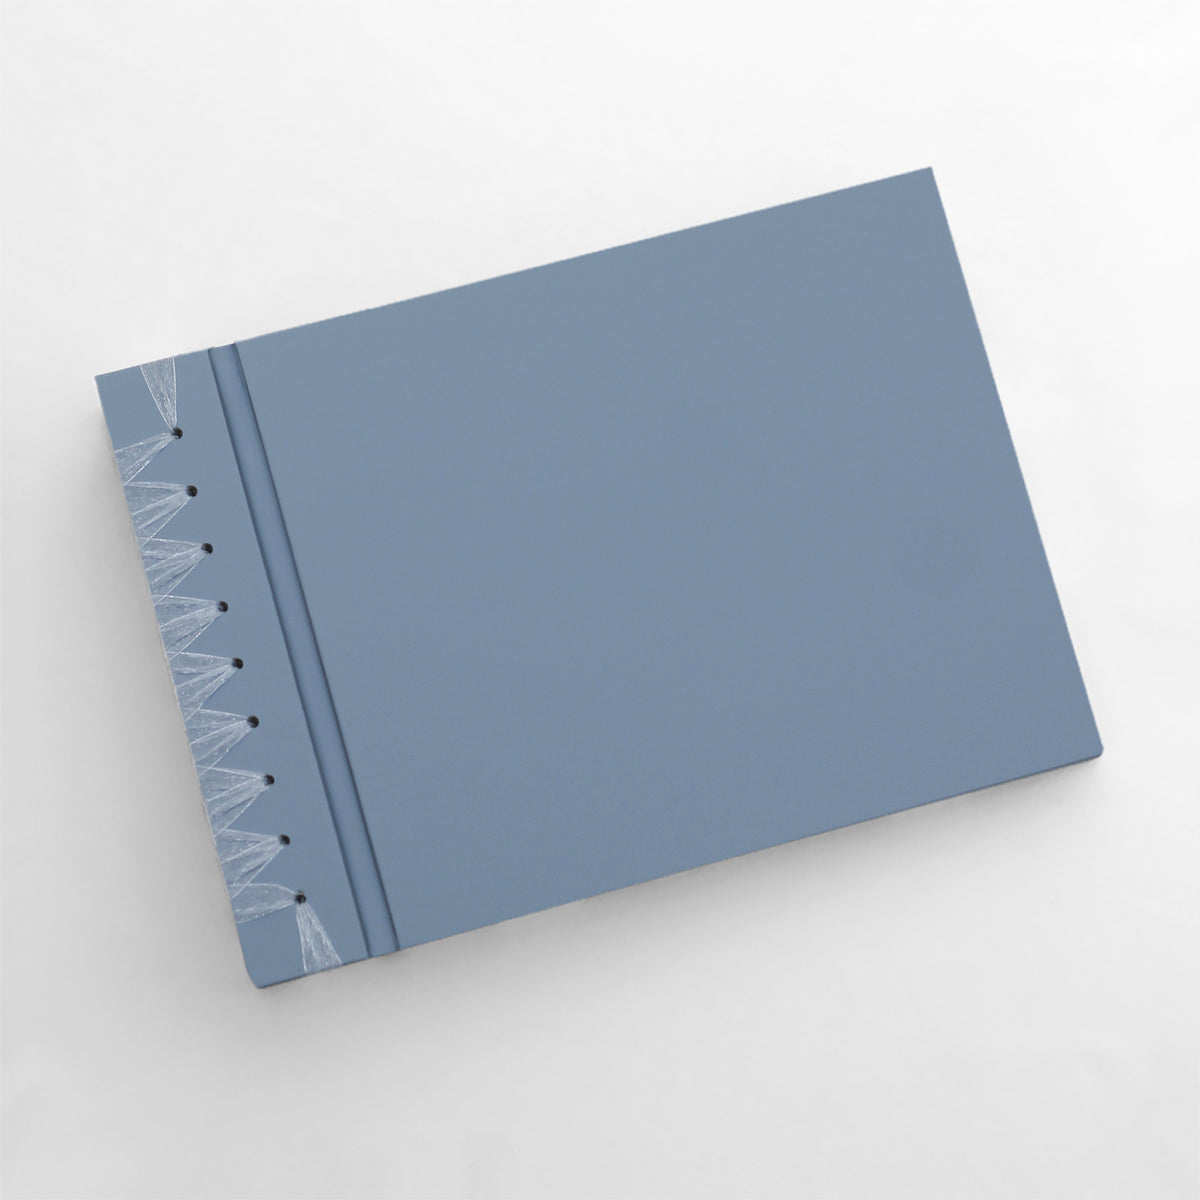 Large 10 x 15 Paper Page Album | Cover: Ocean Blue Vegan Leather | Available Personalized